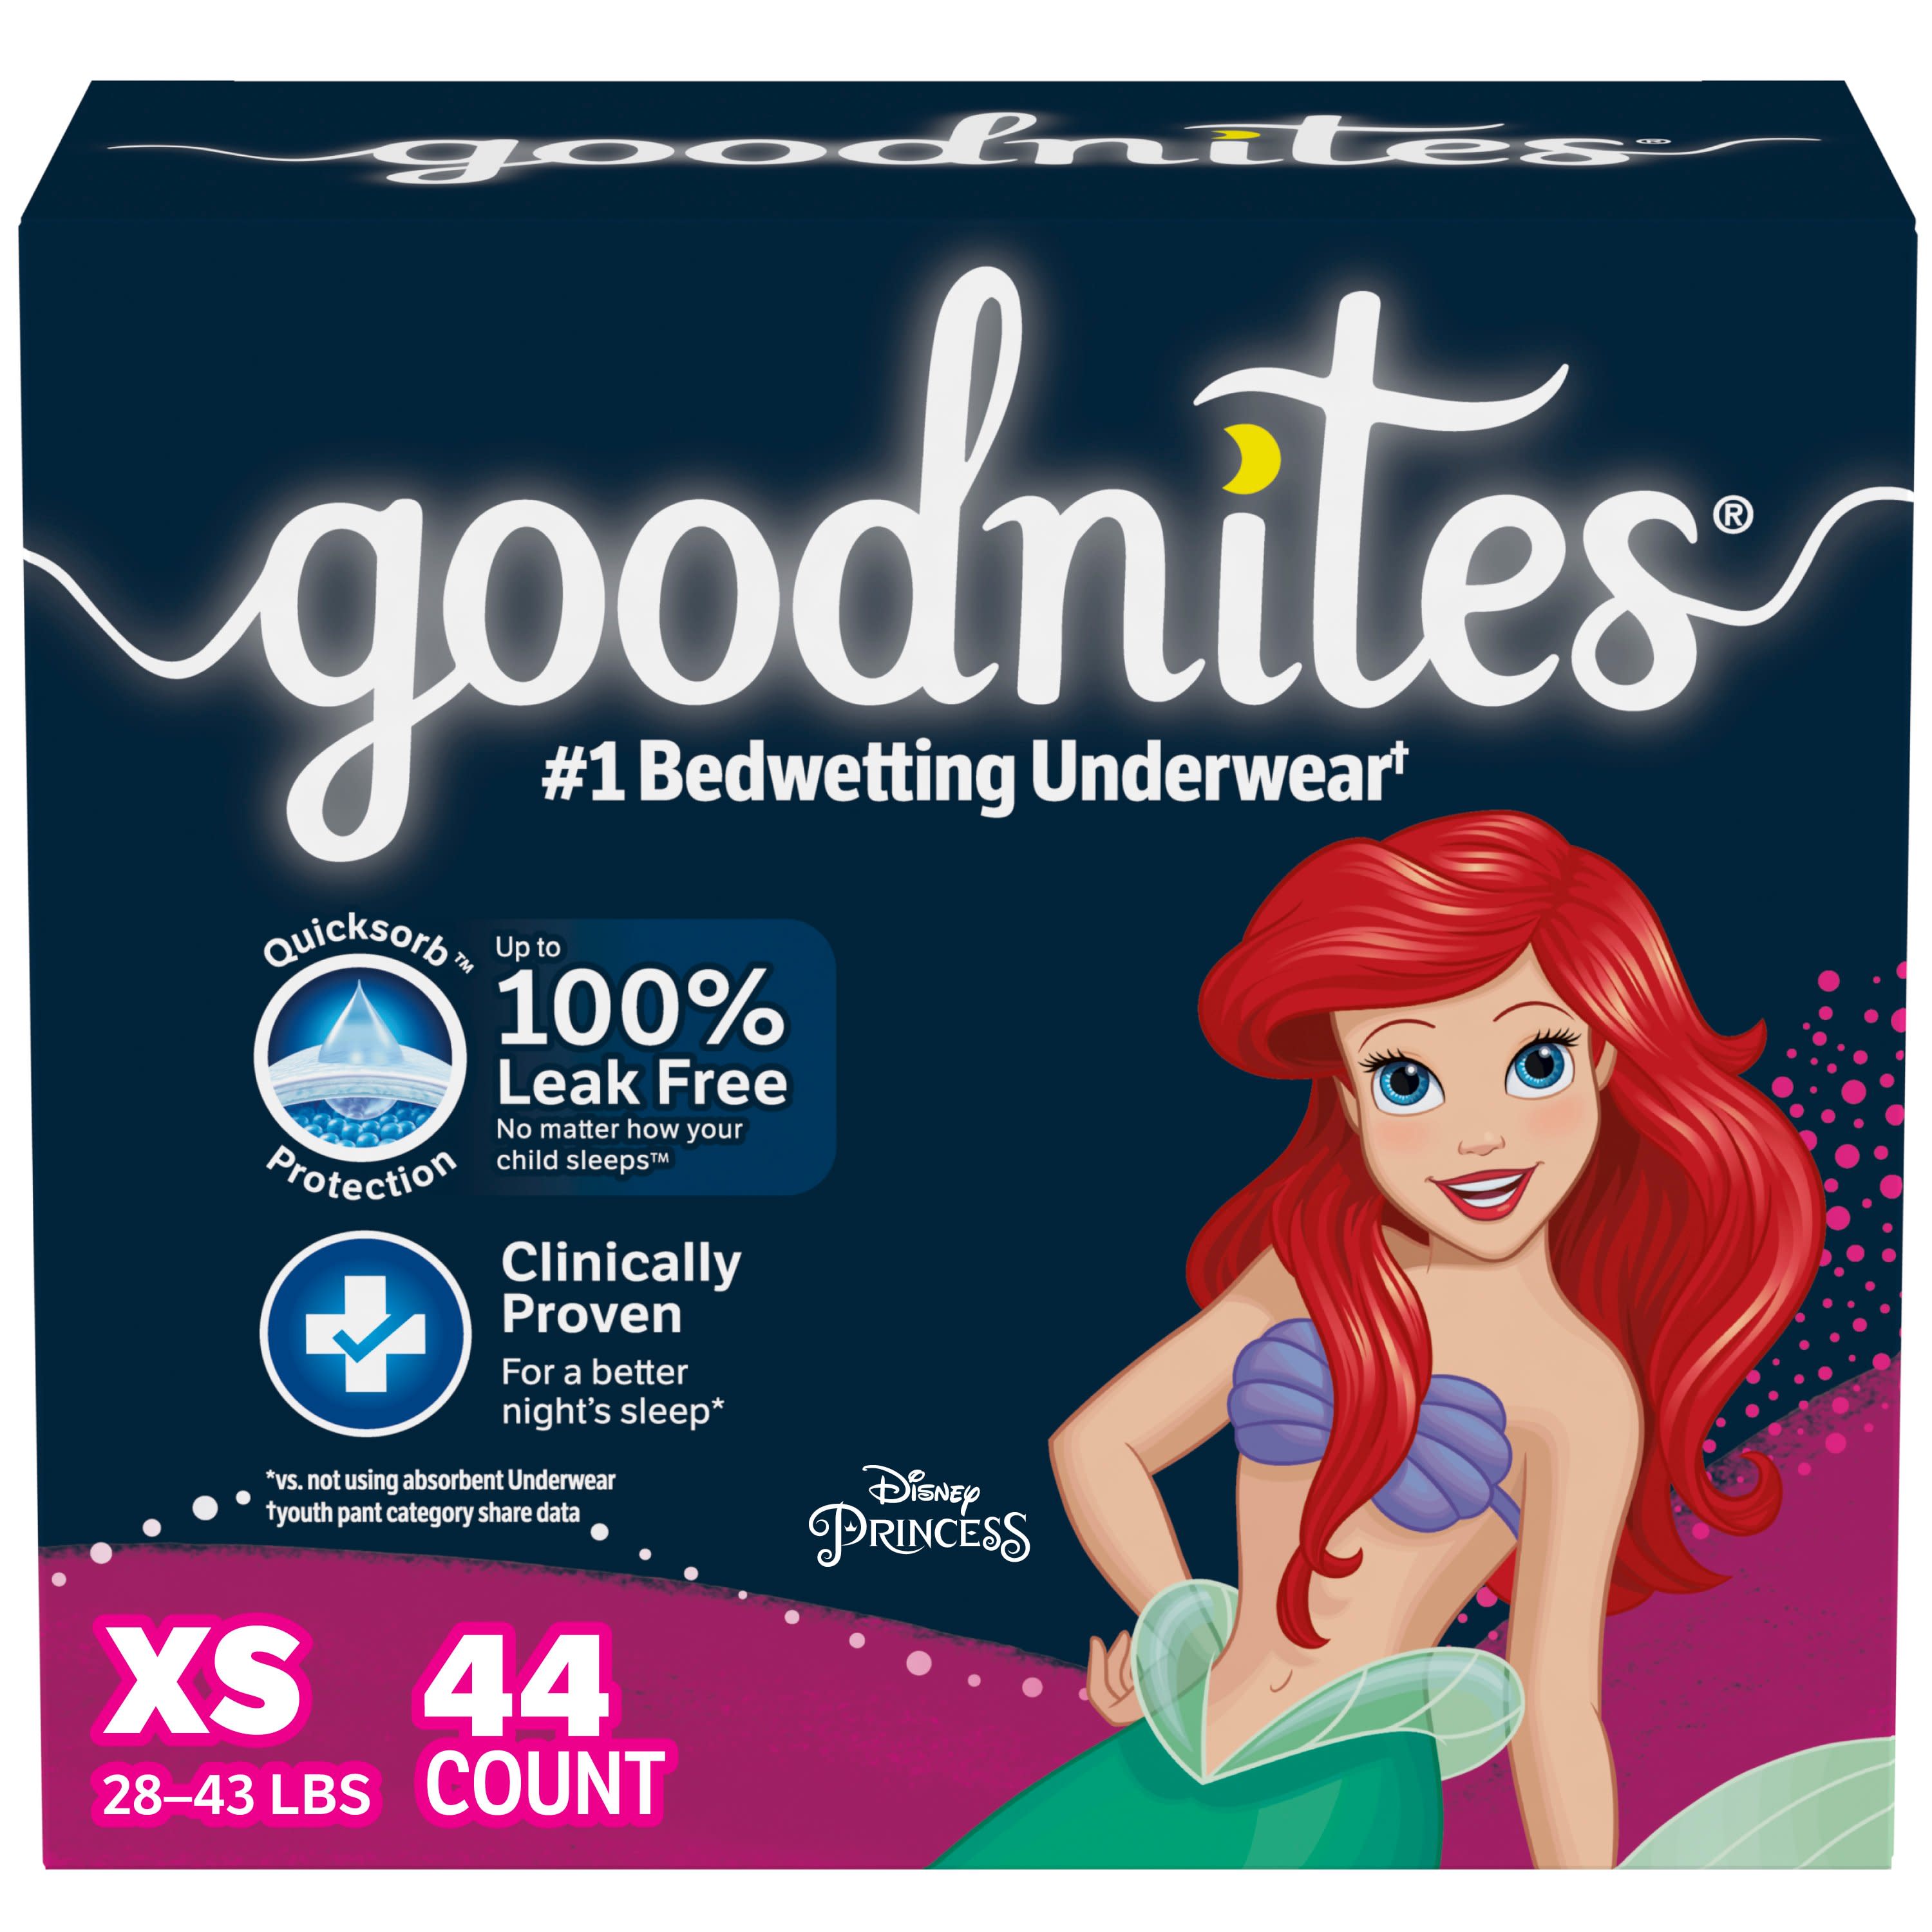 Goodnites Nighttime Bedwetting Underwear for Girls, XS, 44 Ct (Select for More Options) - image 3 of 11